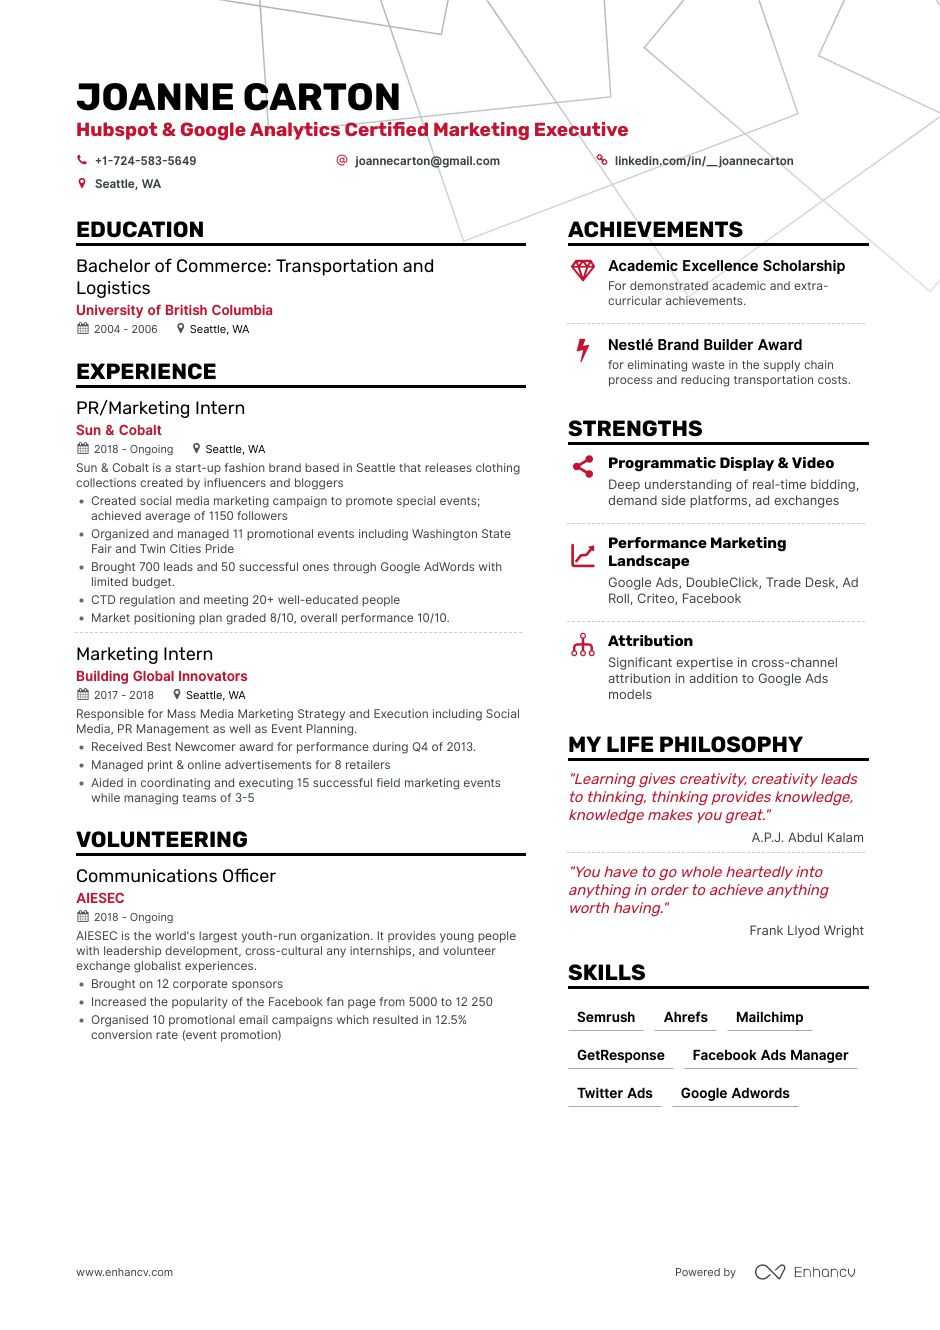 Sample Resume for Freshers with Internship Experience the Best 2019 Fresher Resume formats and Samples